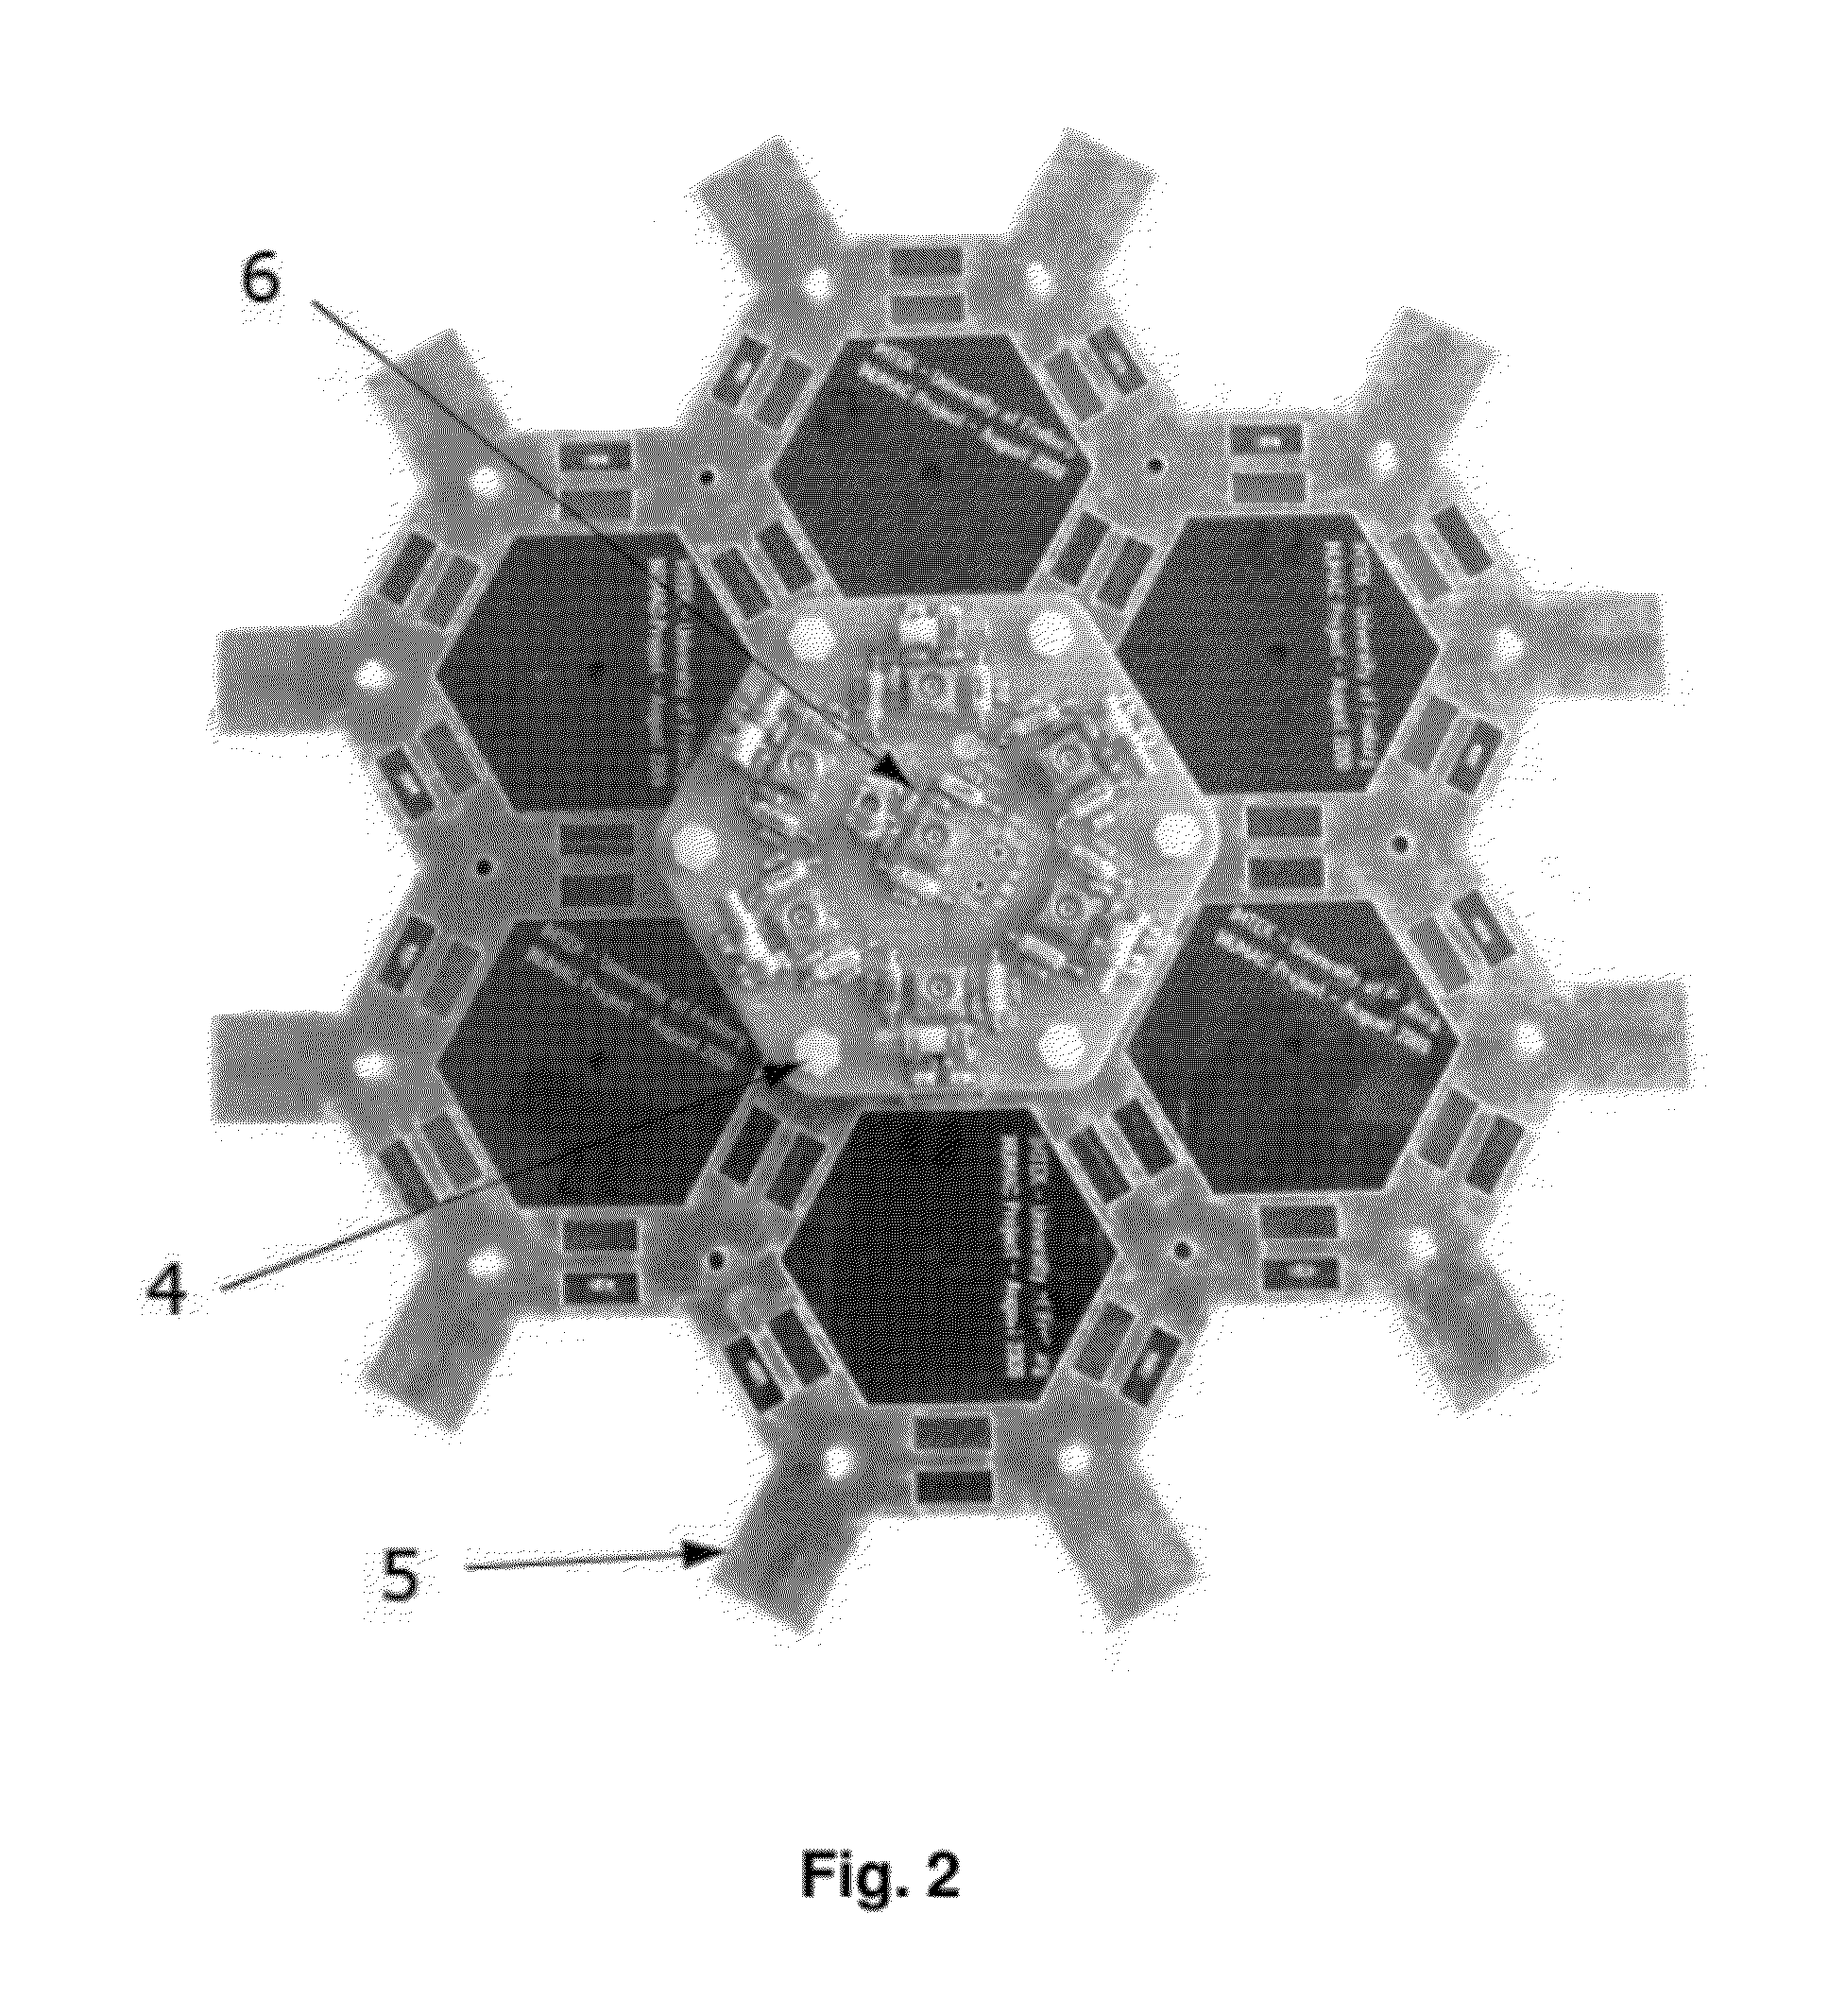 Modular multi-channel coil array for an MRI having decoupling of next but one neighbors